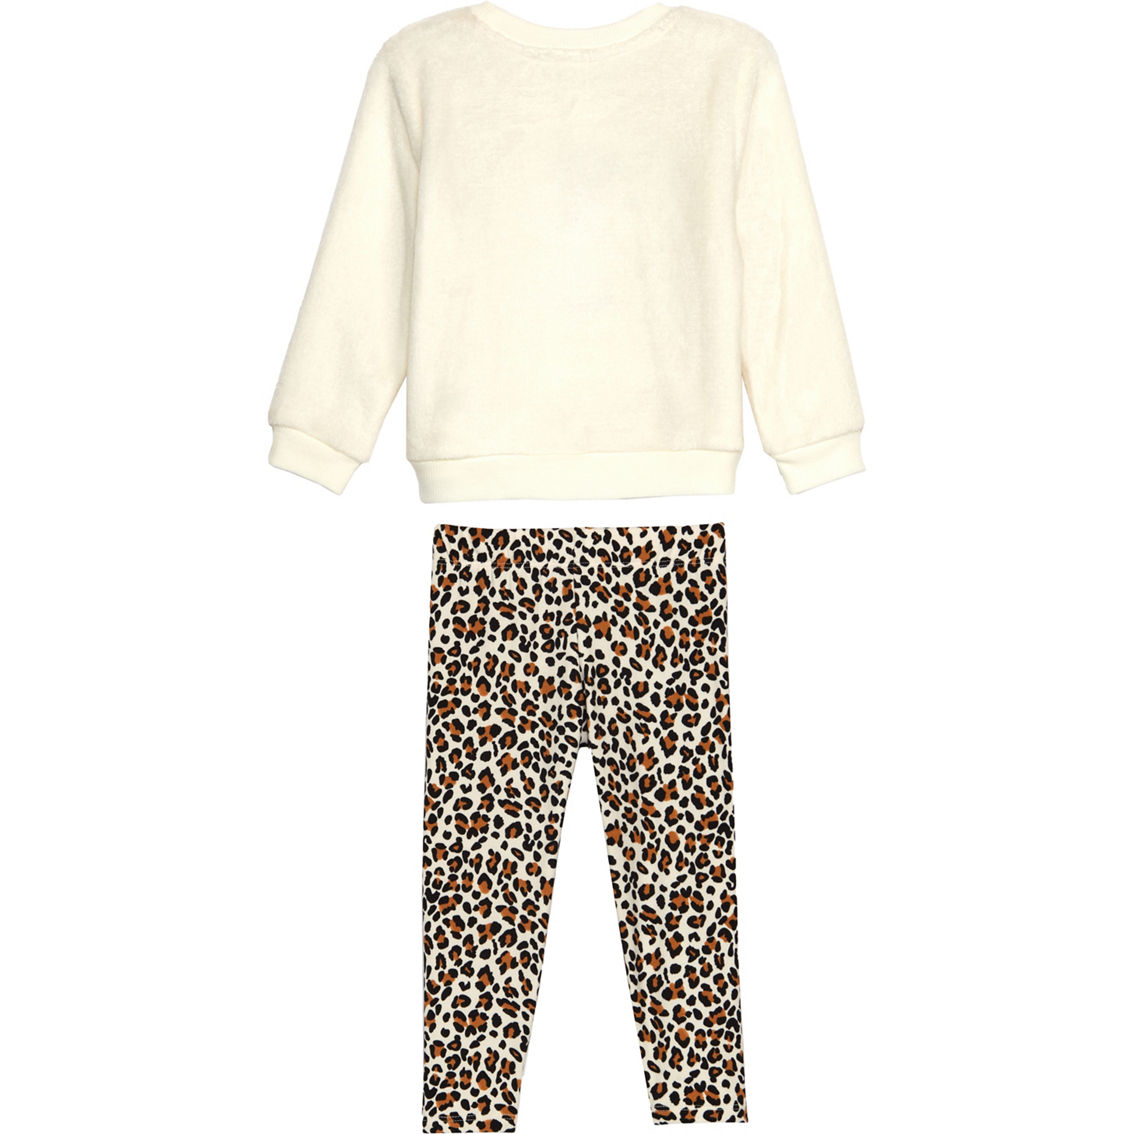 Sweet Butterfly Toddler Girls Leopard Print Kitty Top and Leggings 2 pc. Set - Image 2 of 2